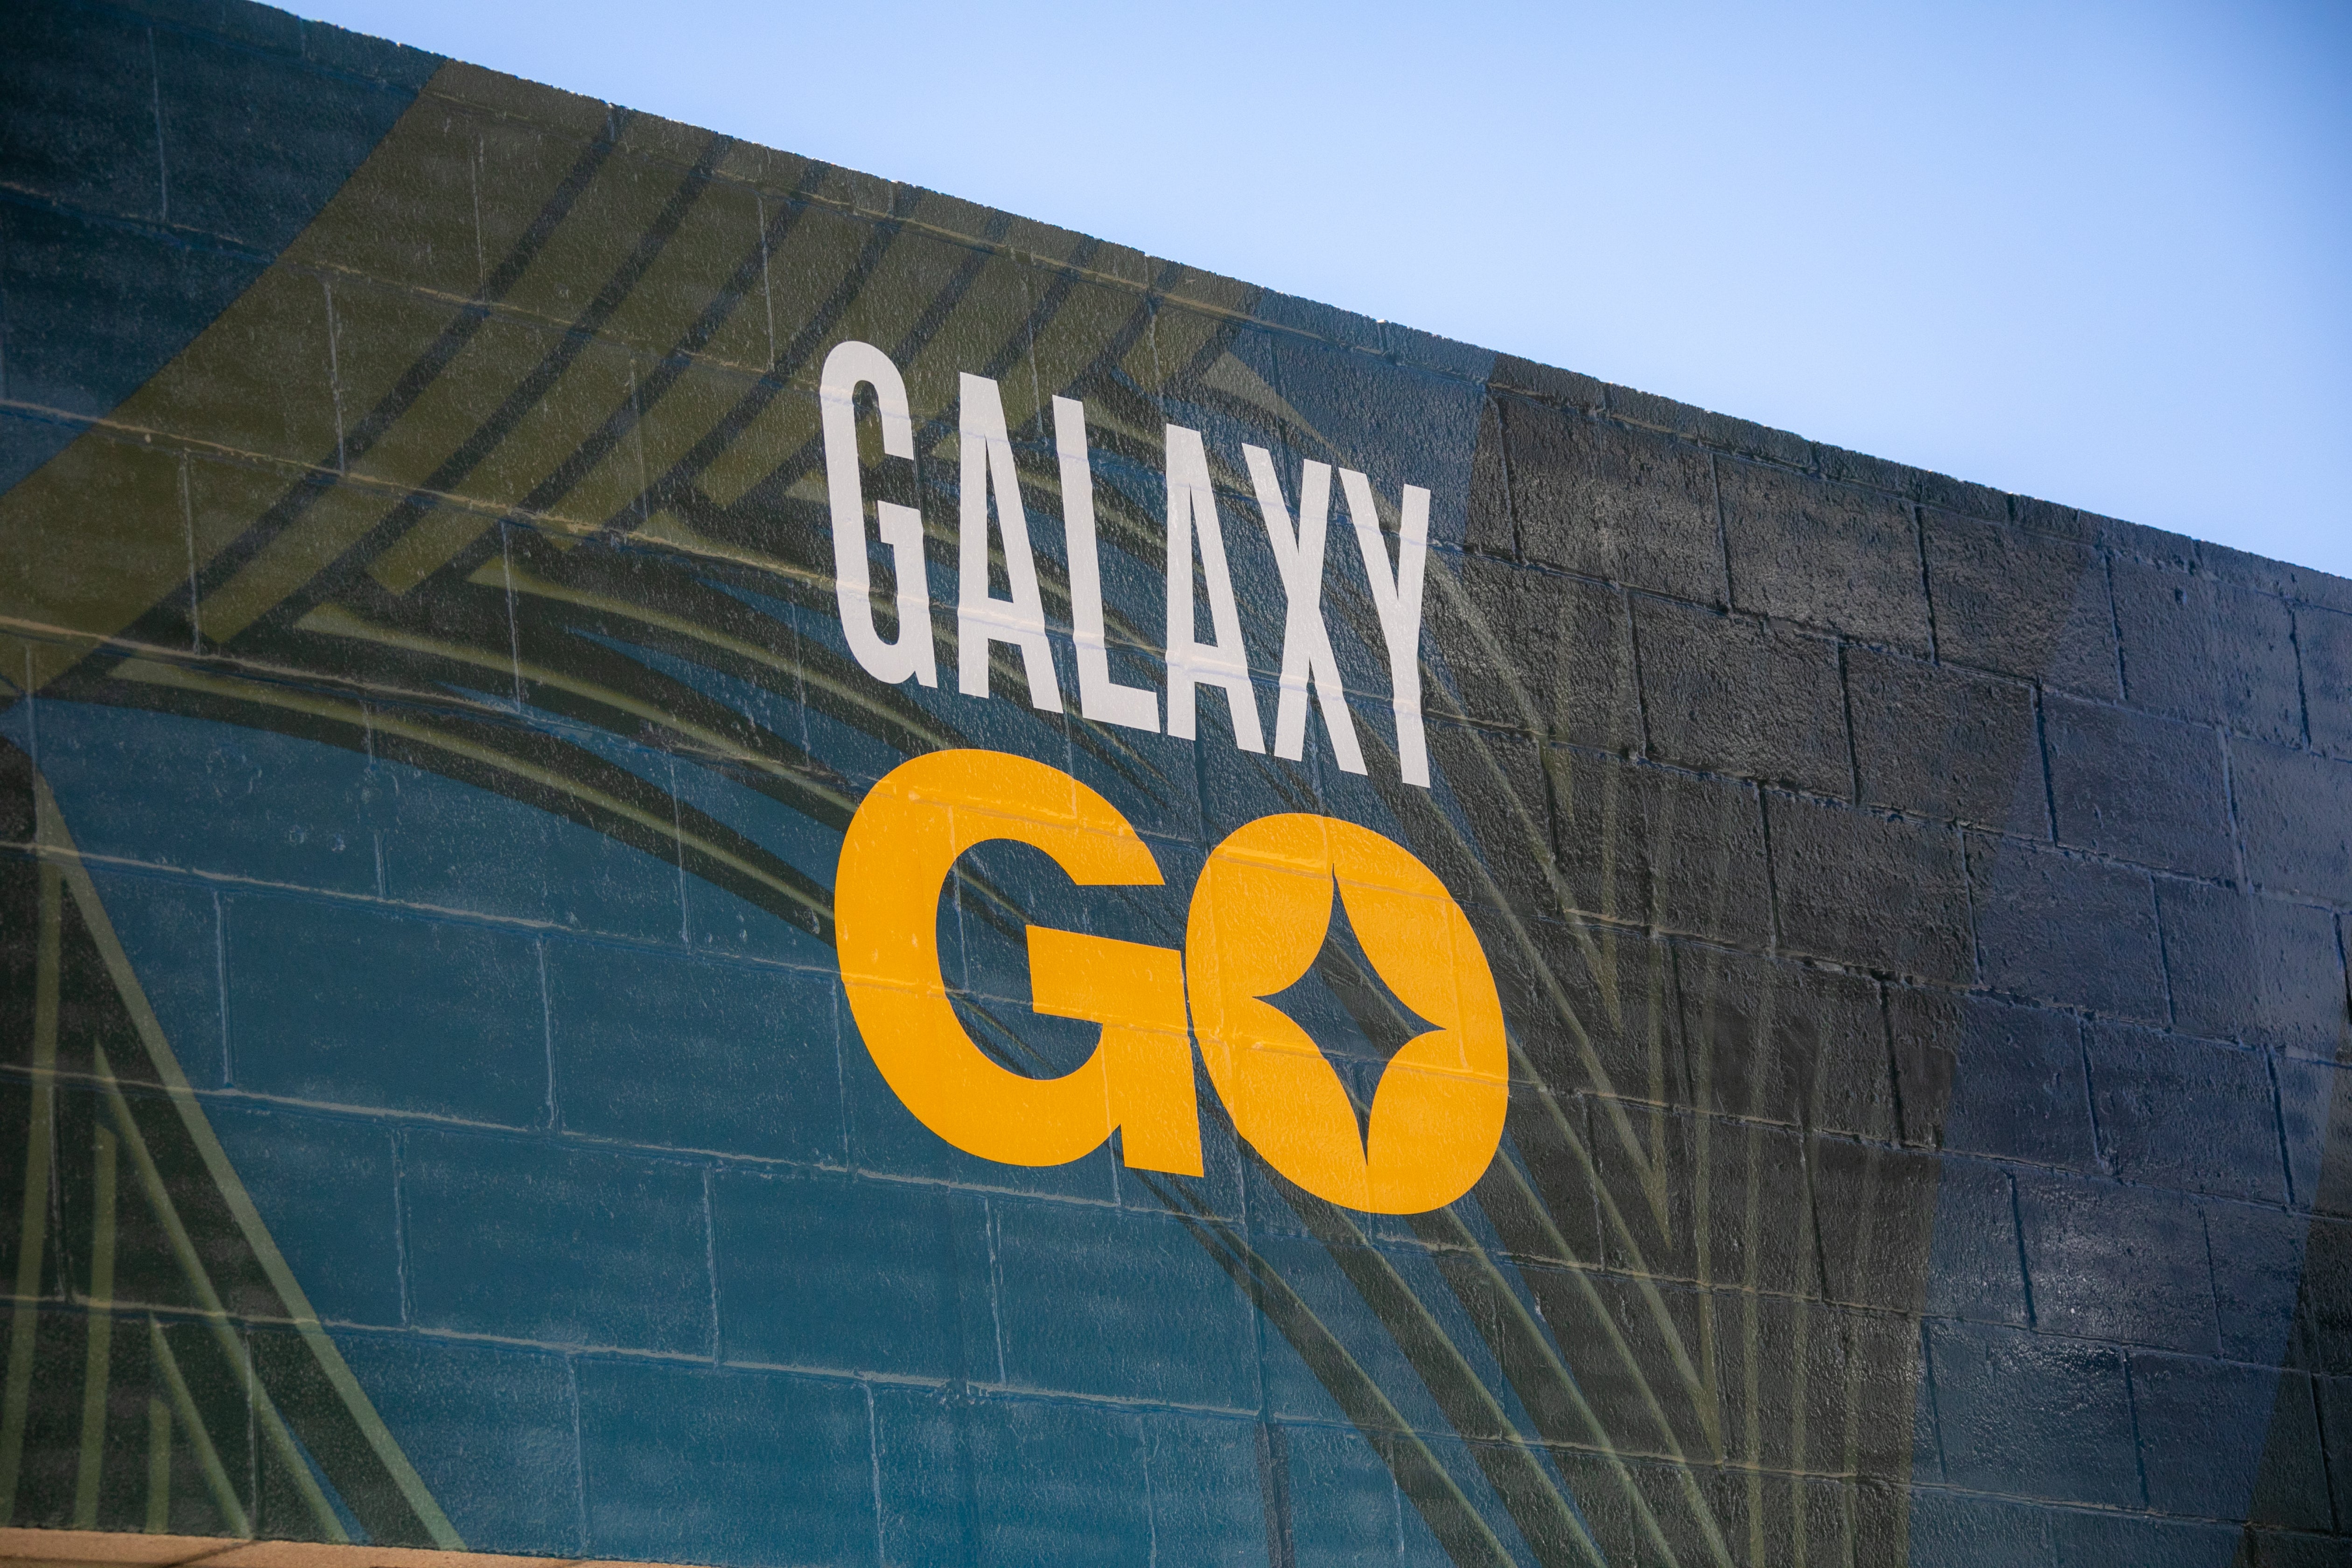 Amazon’s Just Walk Out Technology Debuts at Dignity Health Sports Park with New Checkout-Free Store Galaxy GO